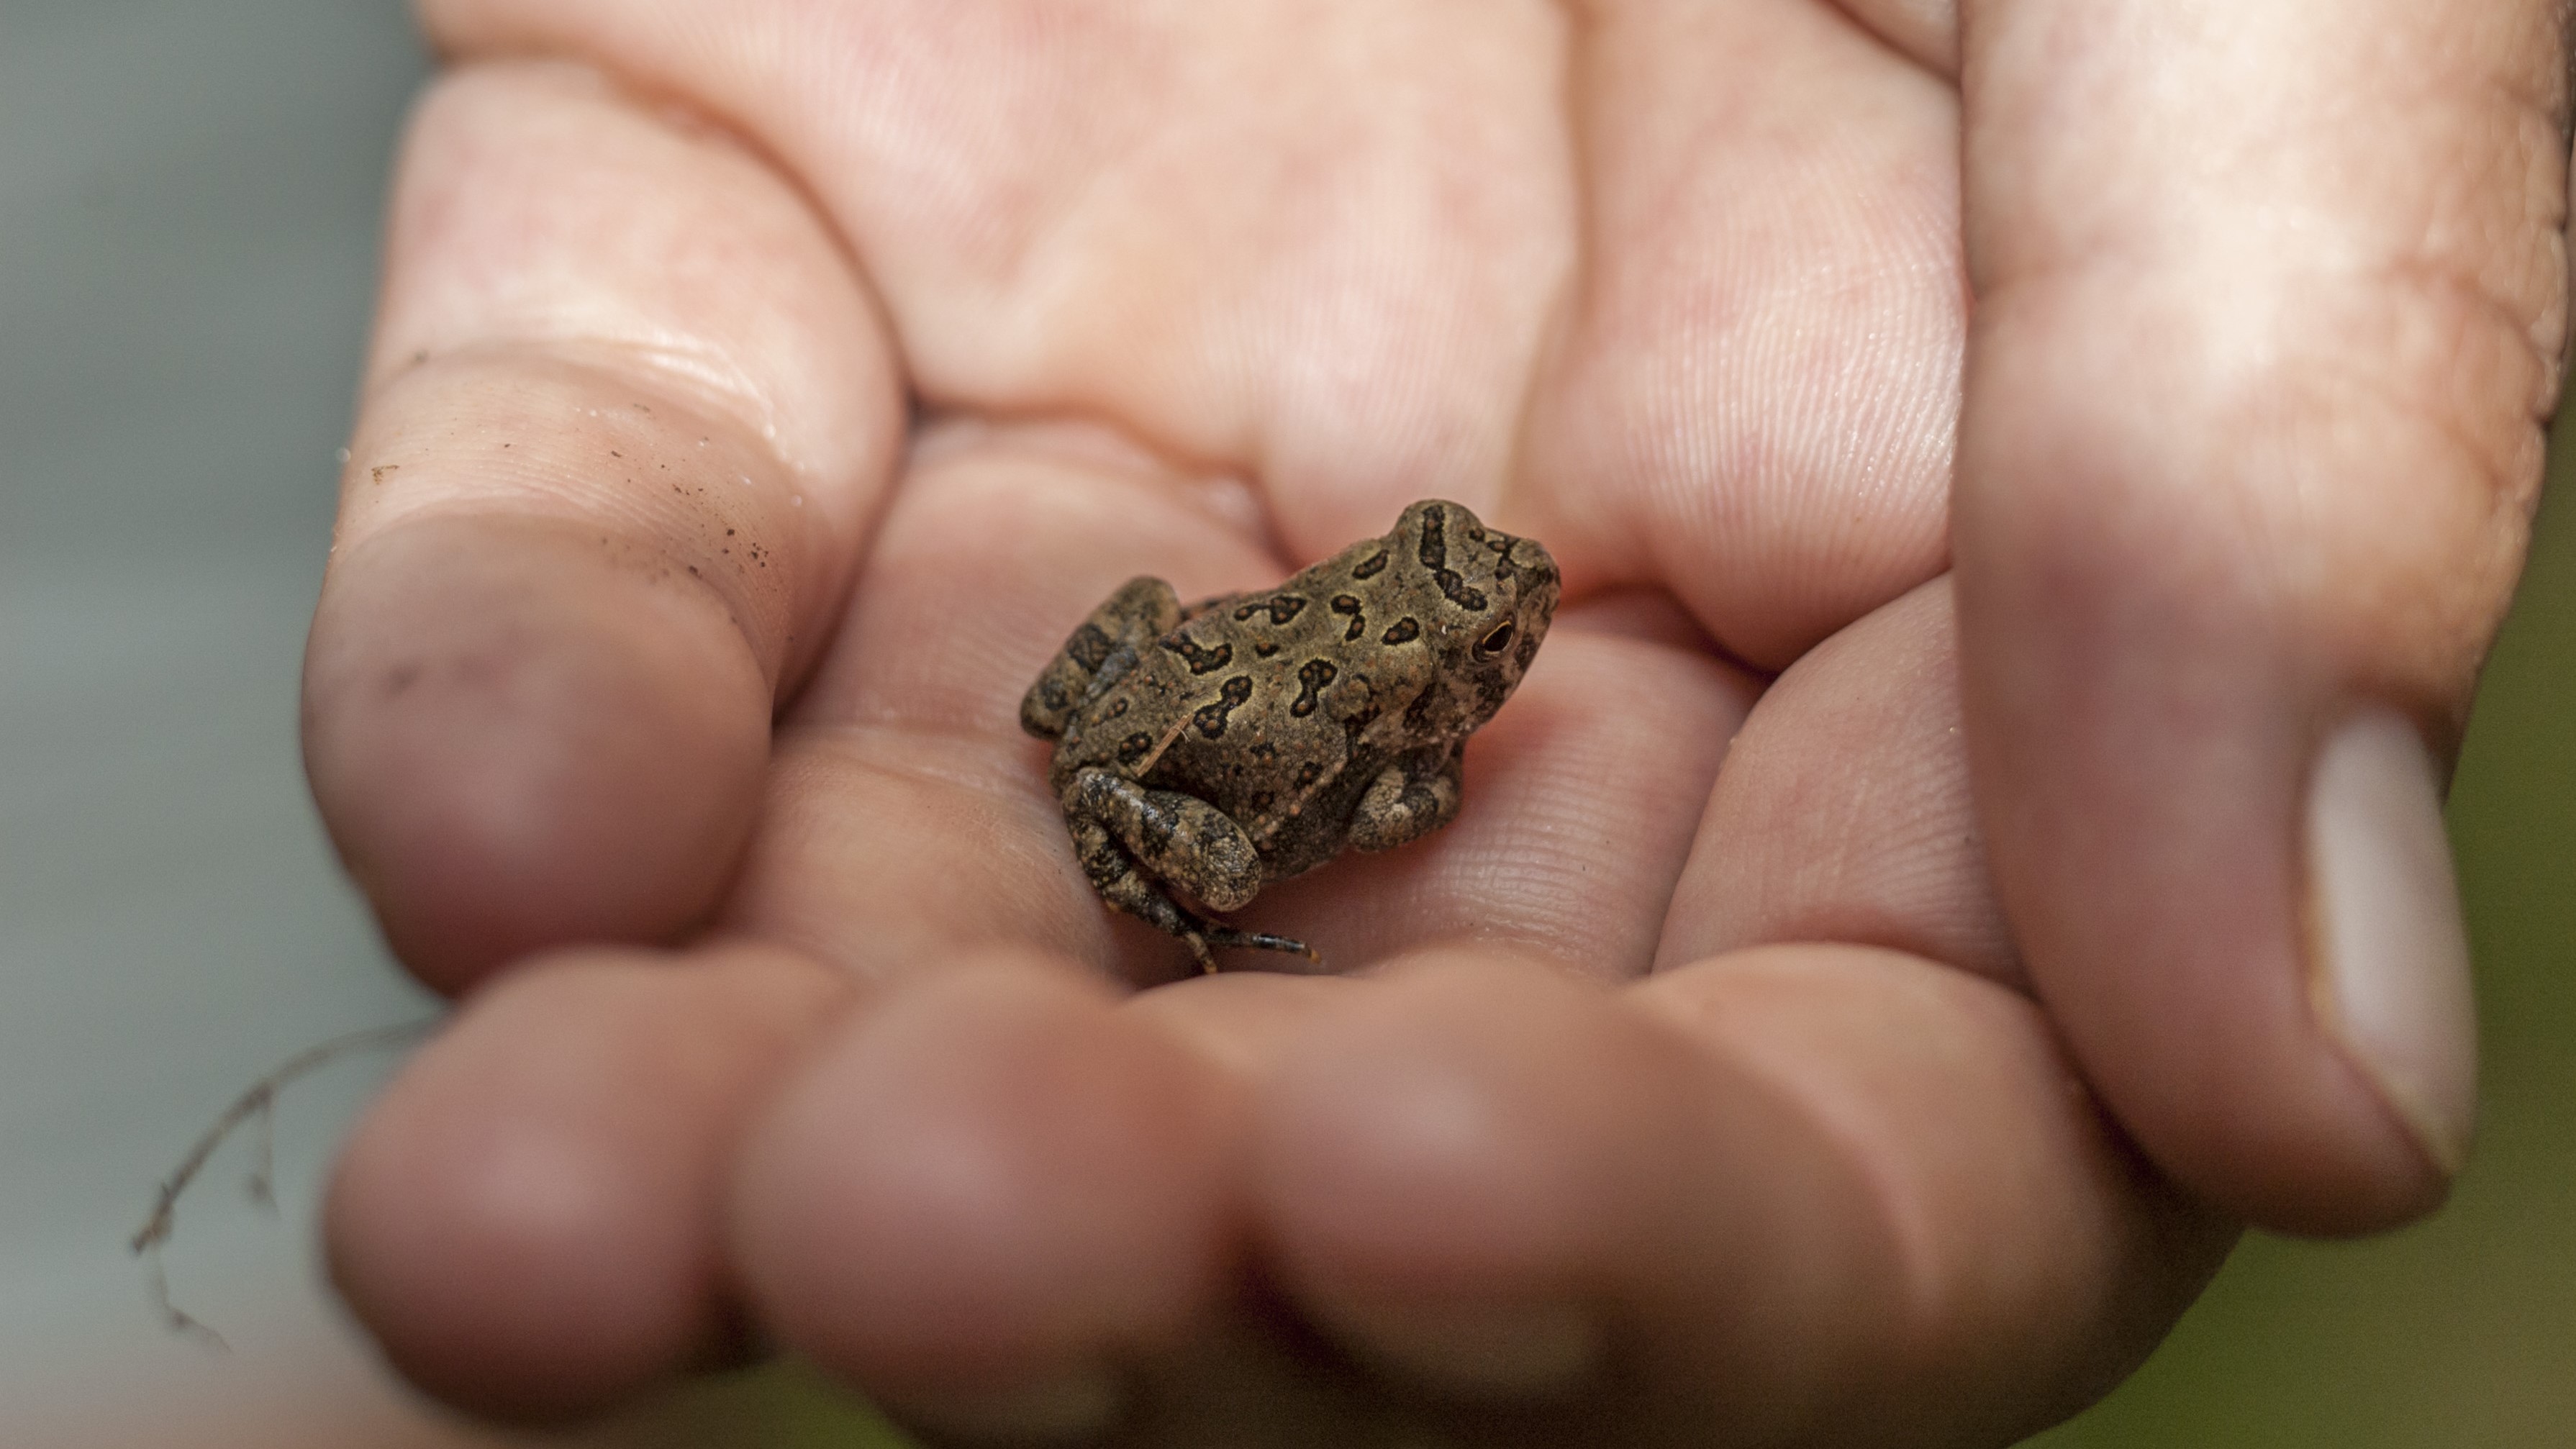 A tiny Fowler's toad (Anaxyrus fowleri) photographed in Tennessee.